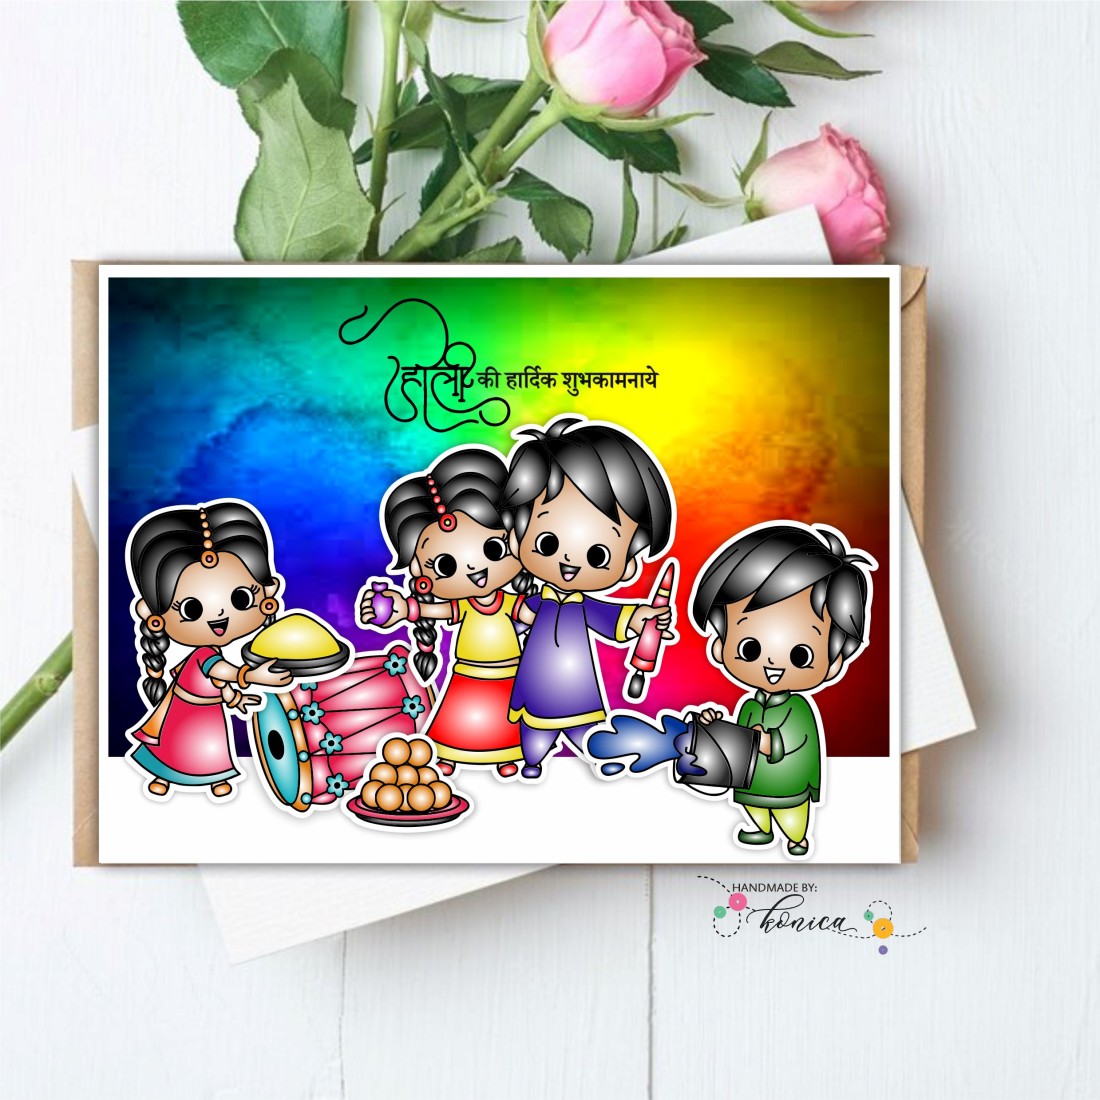 Craftyscrappers Stamps-HOLI GREETINGS-HINDI